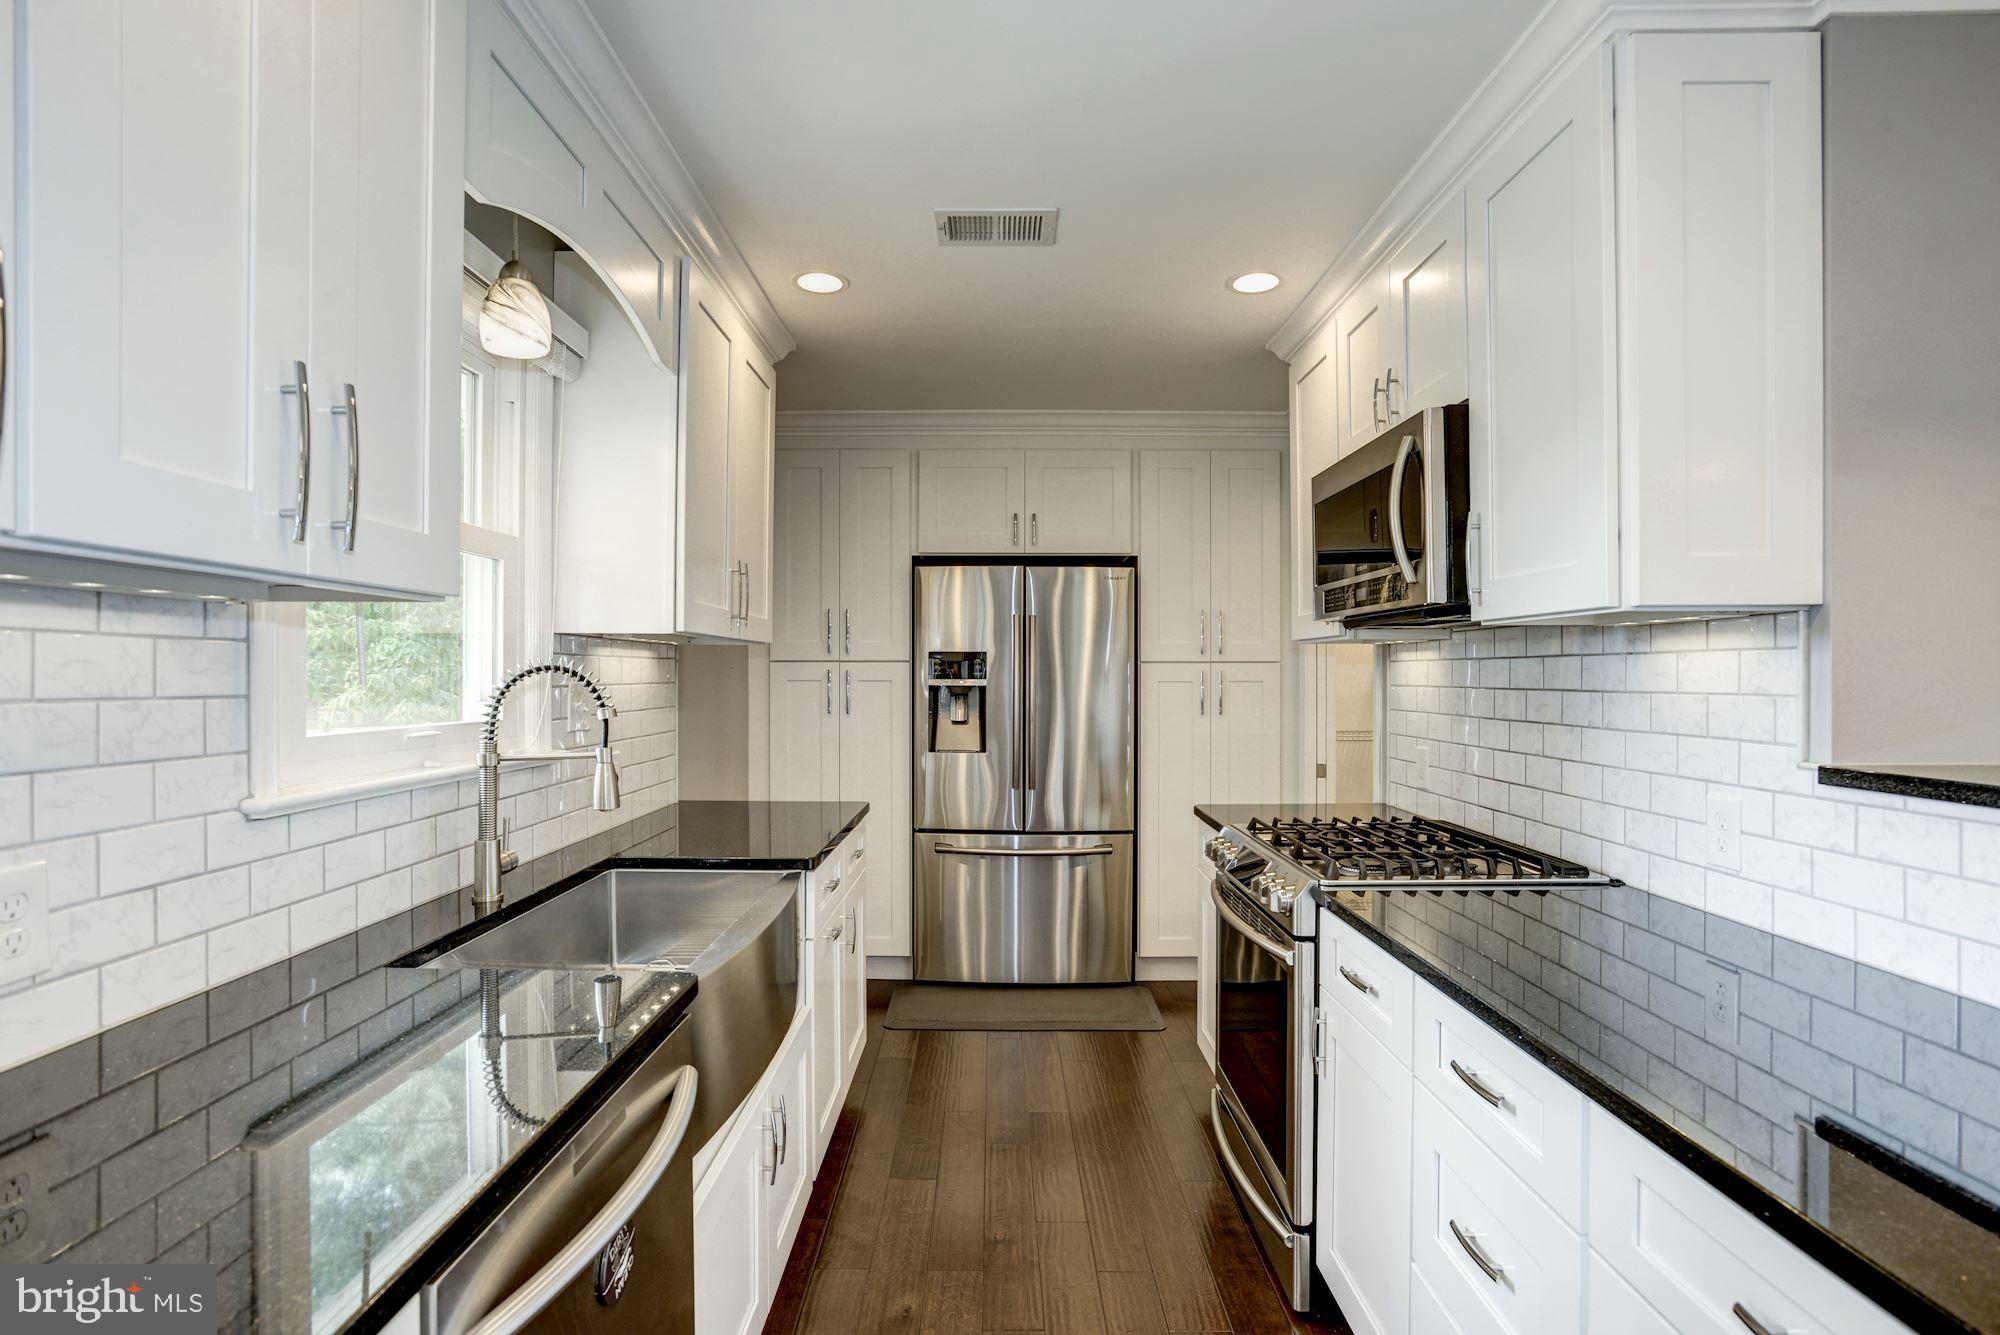 a kitchen with stainless steel appliances a sink dishwasher a refrigerator a stove top oven a sink and dishwasher